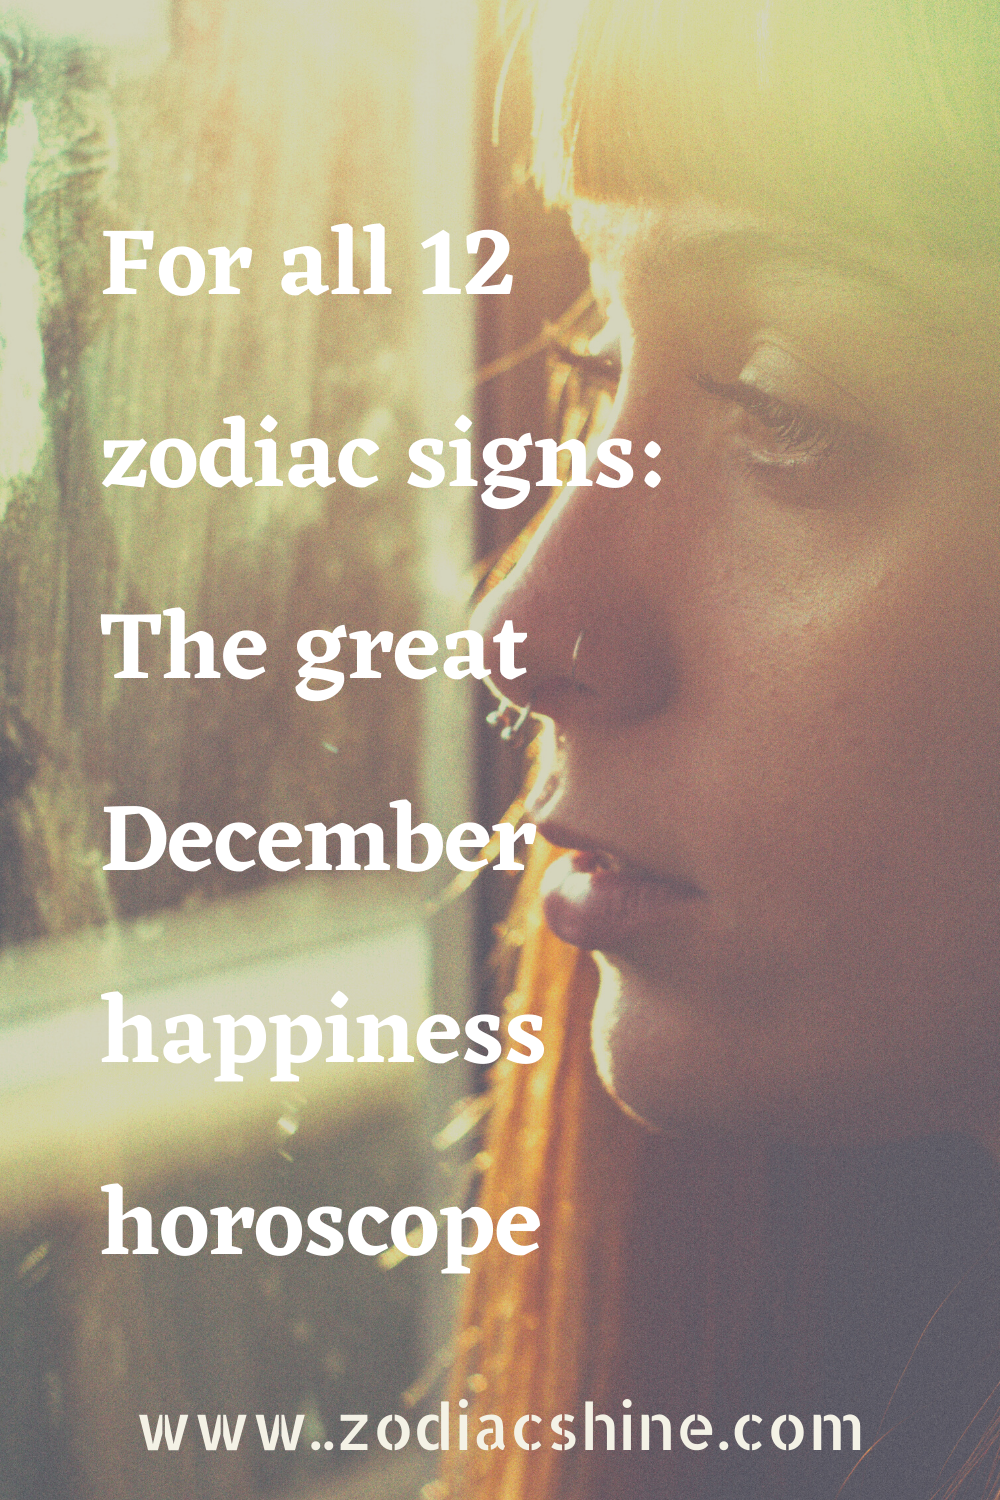 For all 12 zodiac signs: The great December happiness horoscope